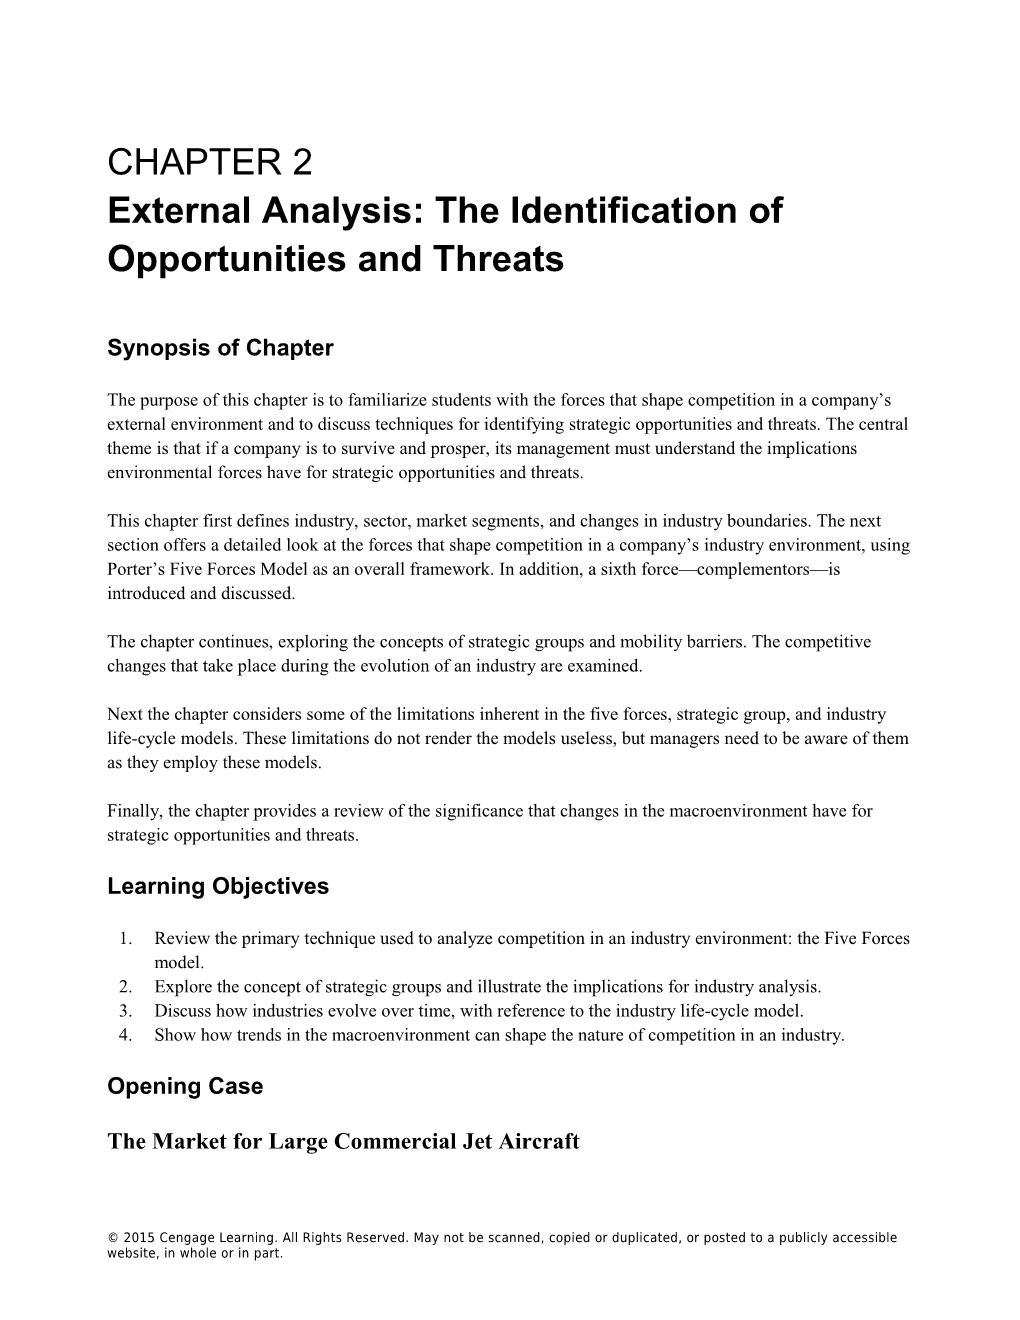 Chapter 2: External Analysis: the Identification of Opportunities and Threats